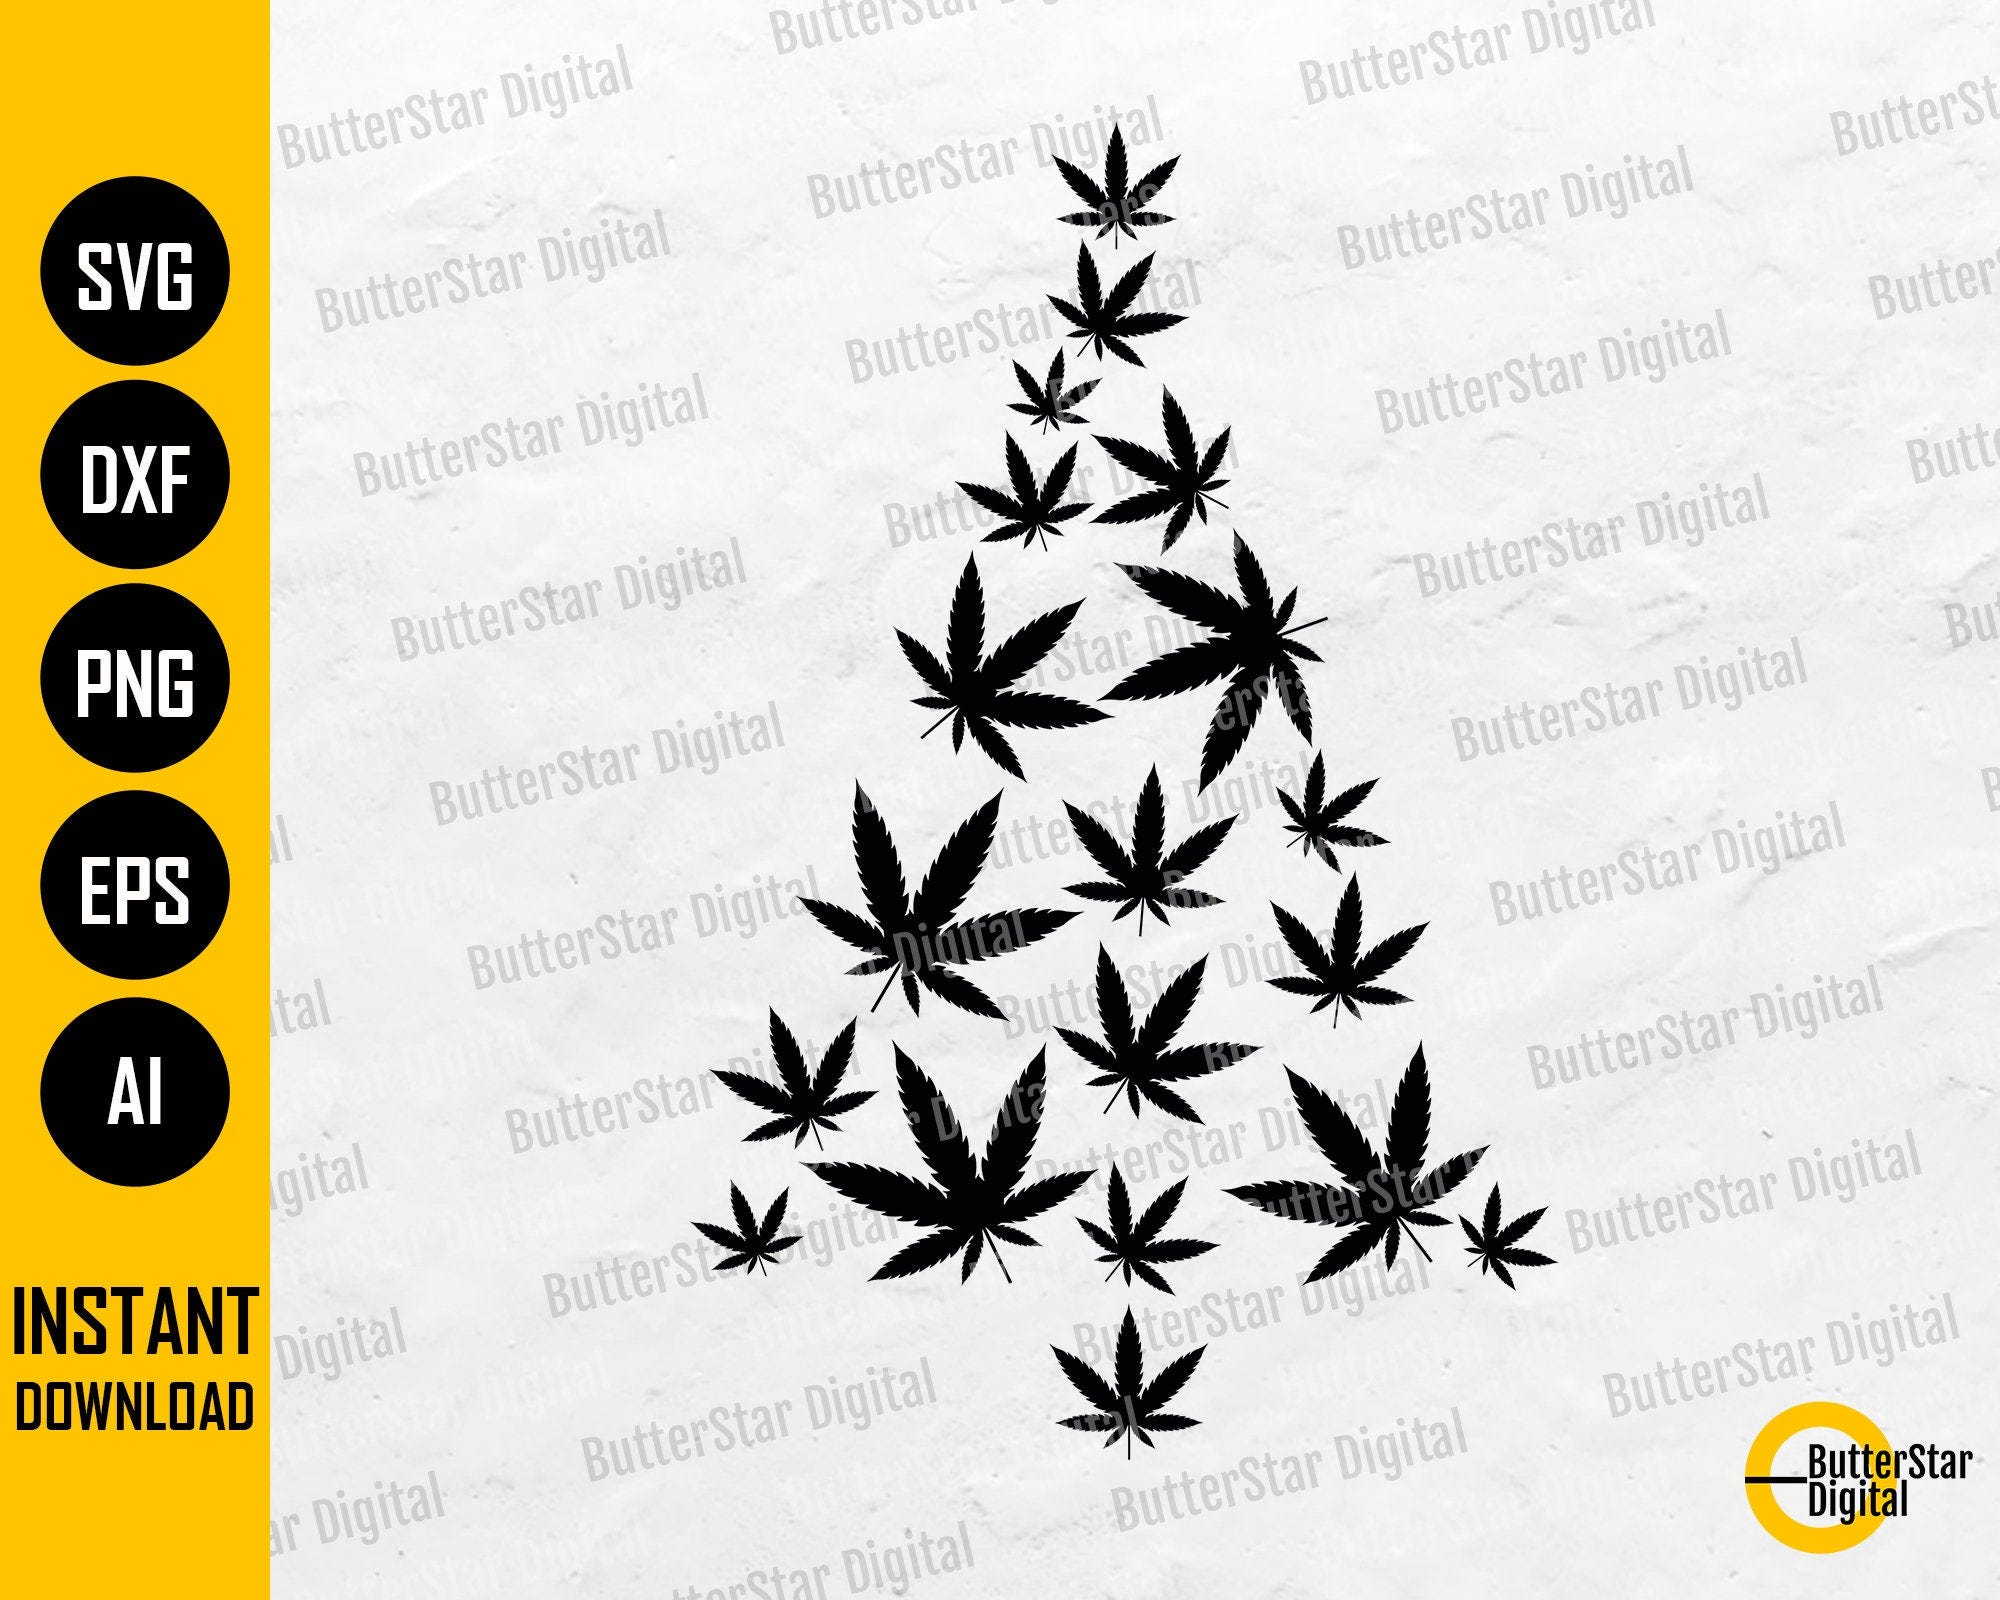 Weed Leaf Christmas Tree SVG | Stoner Holiday | Cannabis Winter Decal Decor Graphics | Cricut Cutfile Clip Art Vector Digital Dxf Png Eps Ai